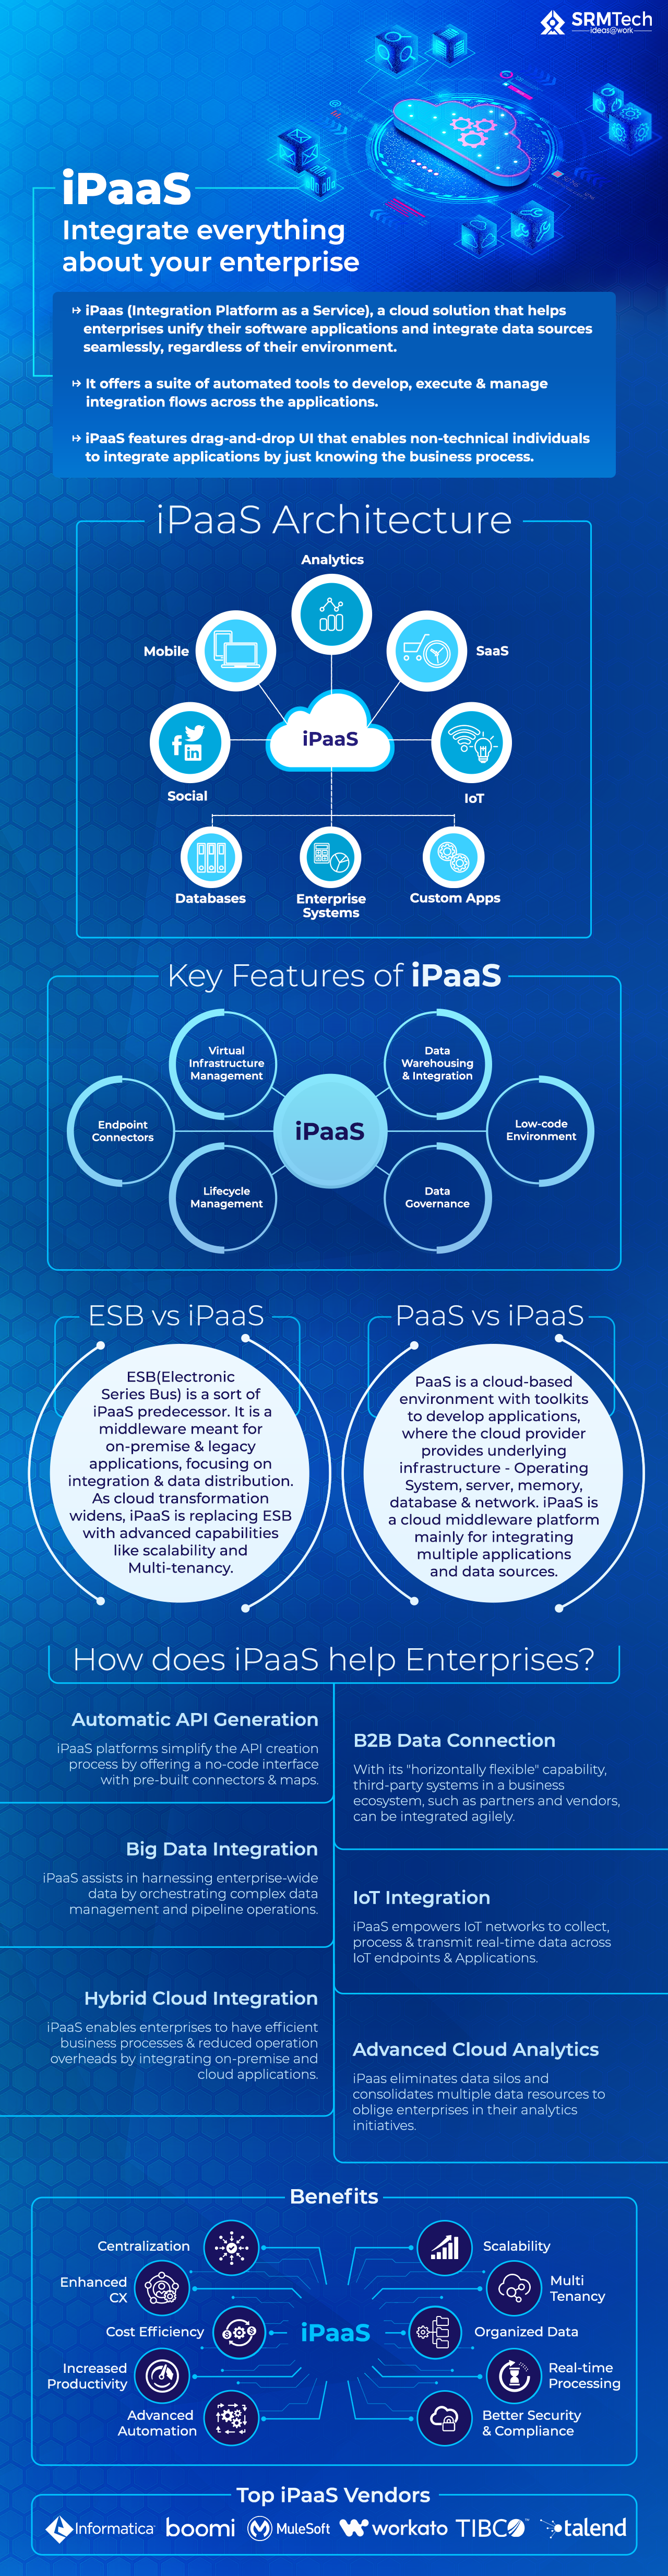 iPaaS – Integrate everything about your enterprise